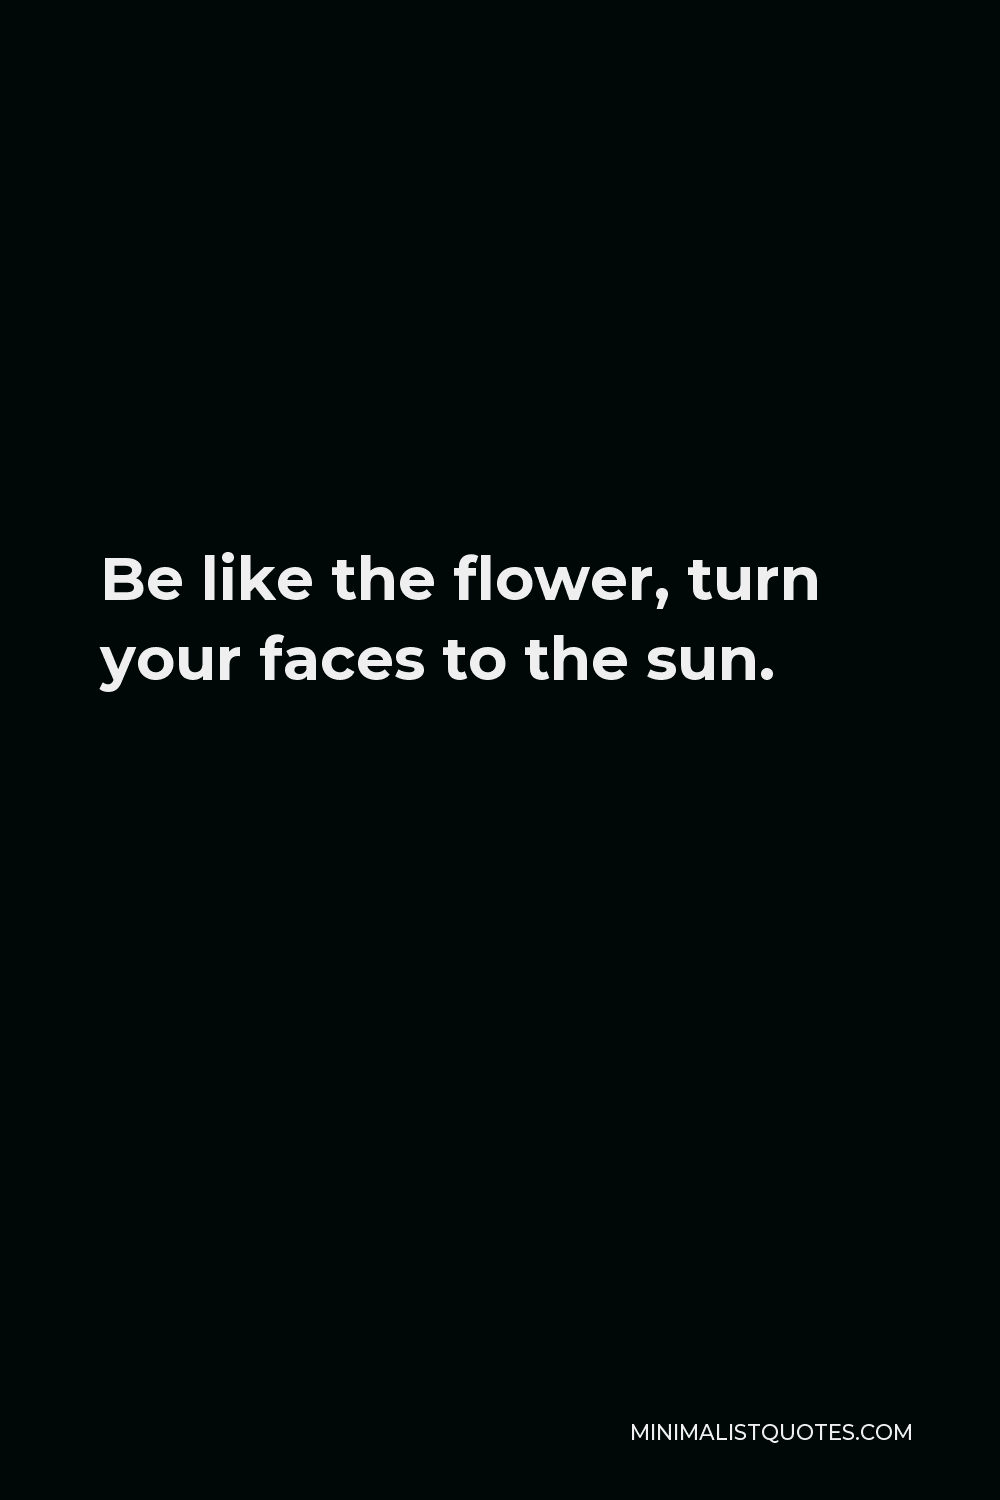 Khalil Gibran Quote - Be like the flower, turn your faces to the sun.